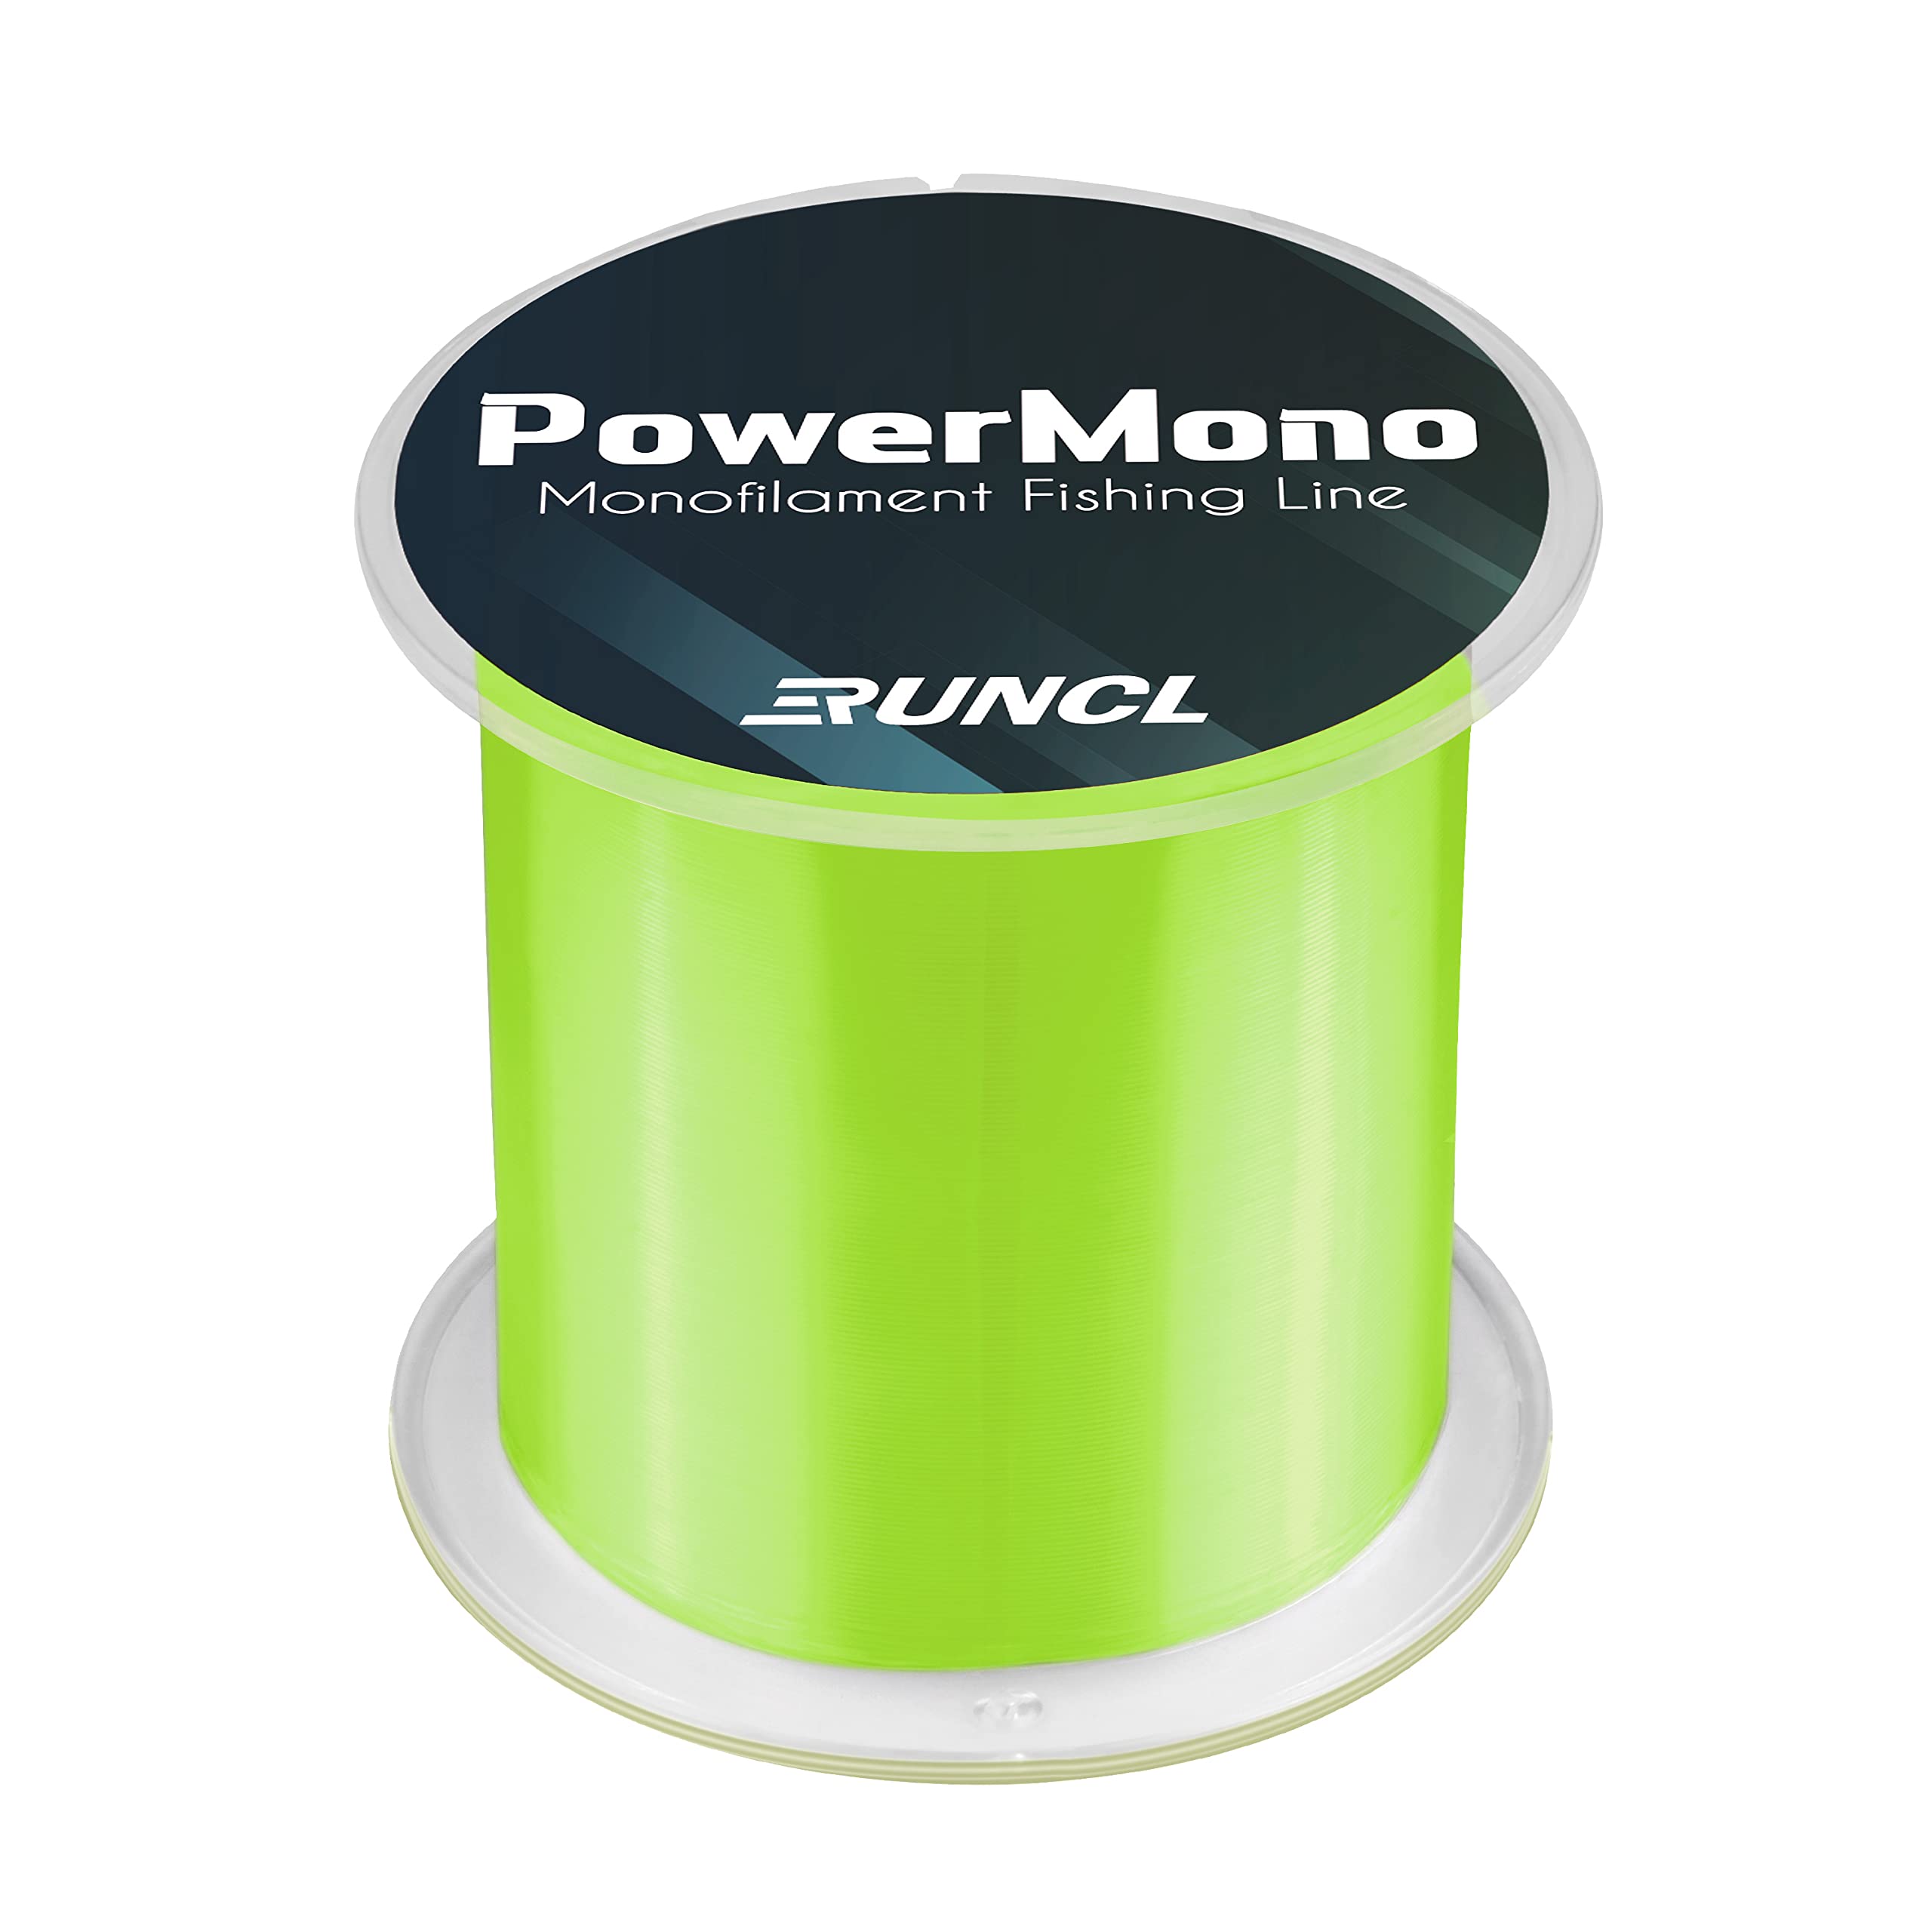 RUNCL PowerMono Fishing Line, Monofilament Fishing Line 300/500/1000Yds -  Ultimate Strength, Shock Absorber, Suspend in Water, Knot Friendly - Mono Fishing  Line 3-35LB, Low- & High-Vis Available F - Yellow 5LB(2.3kgs)/0.18mm/300yds